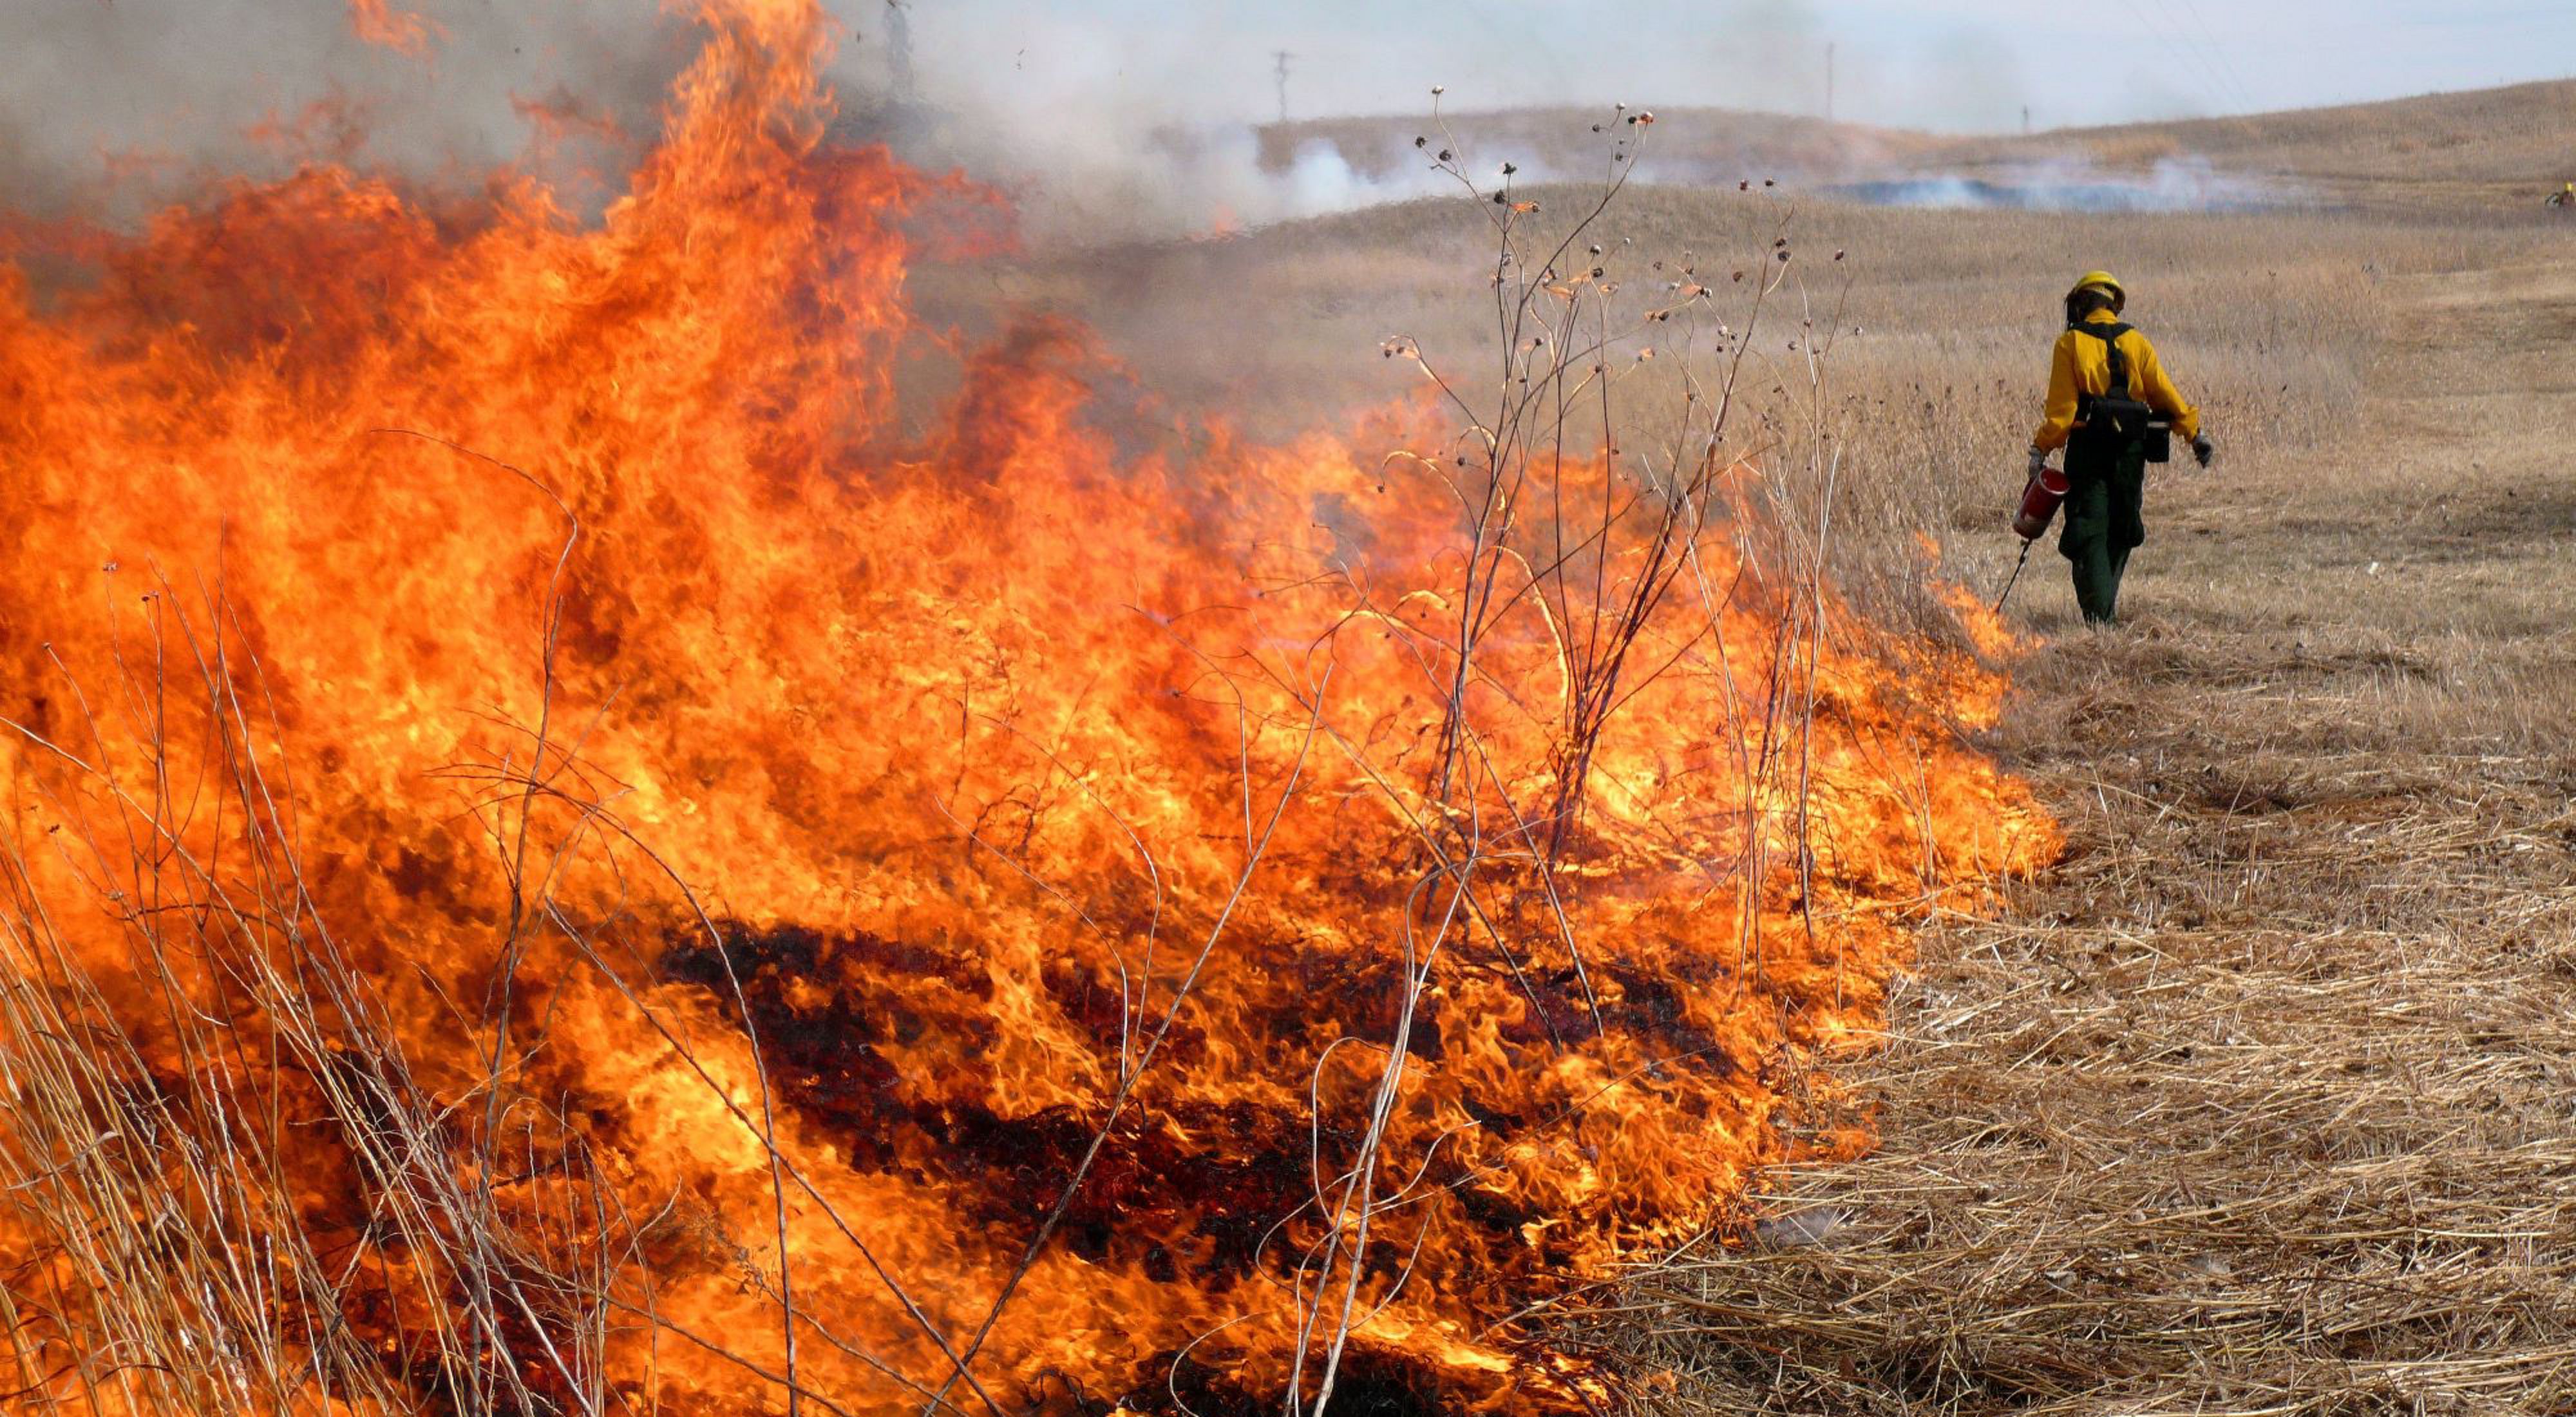 A person carries a drip torch and lights a head fire at the Derr tract sandhills prairie in Nebraska.